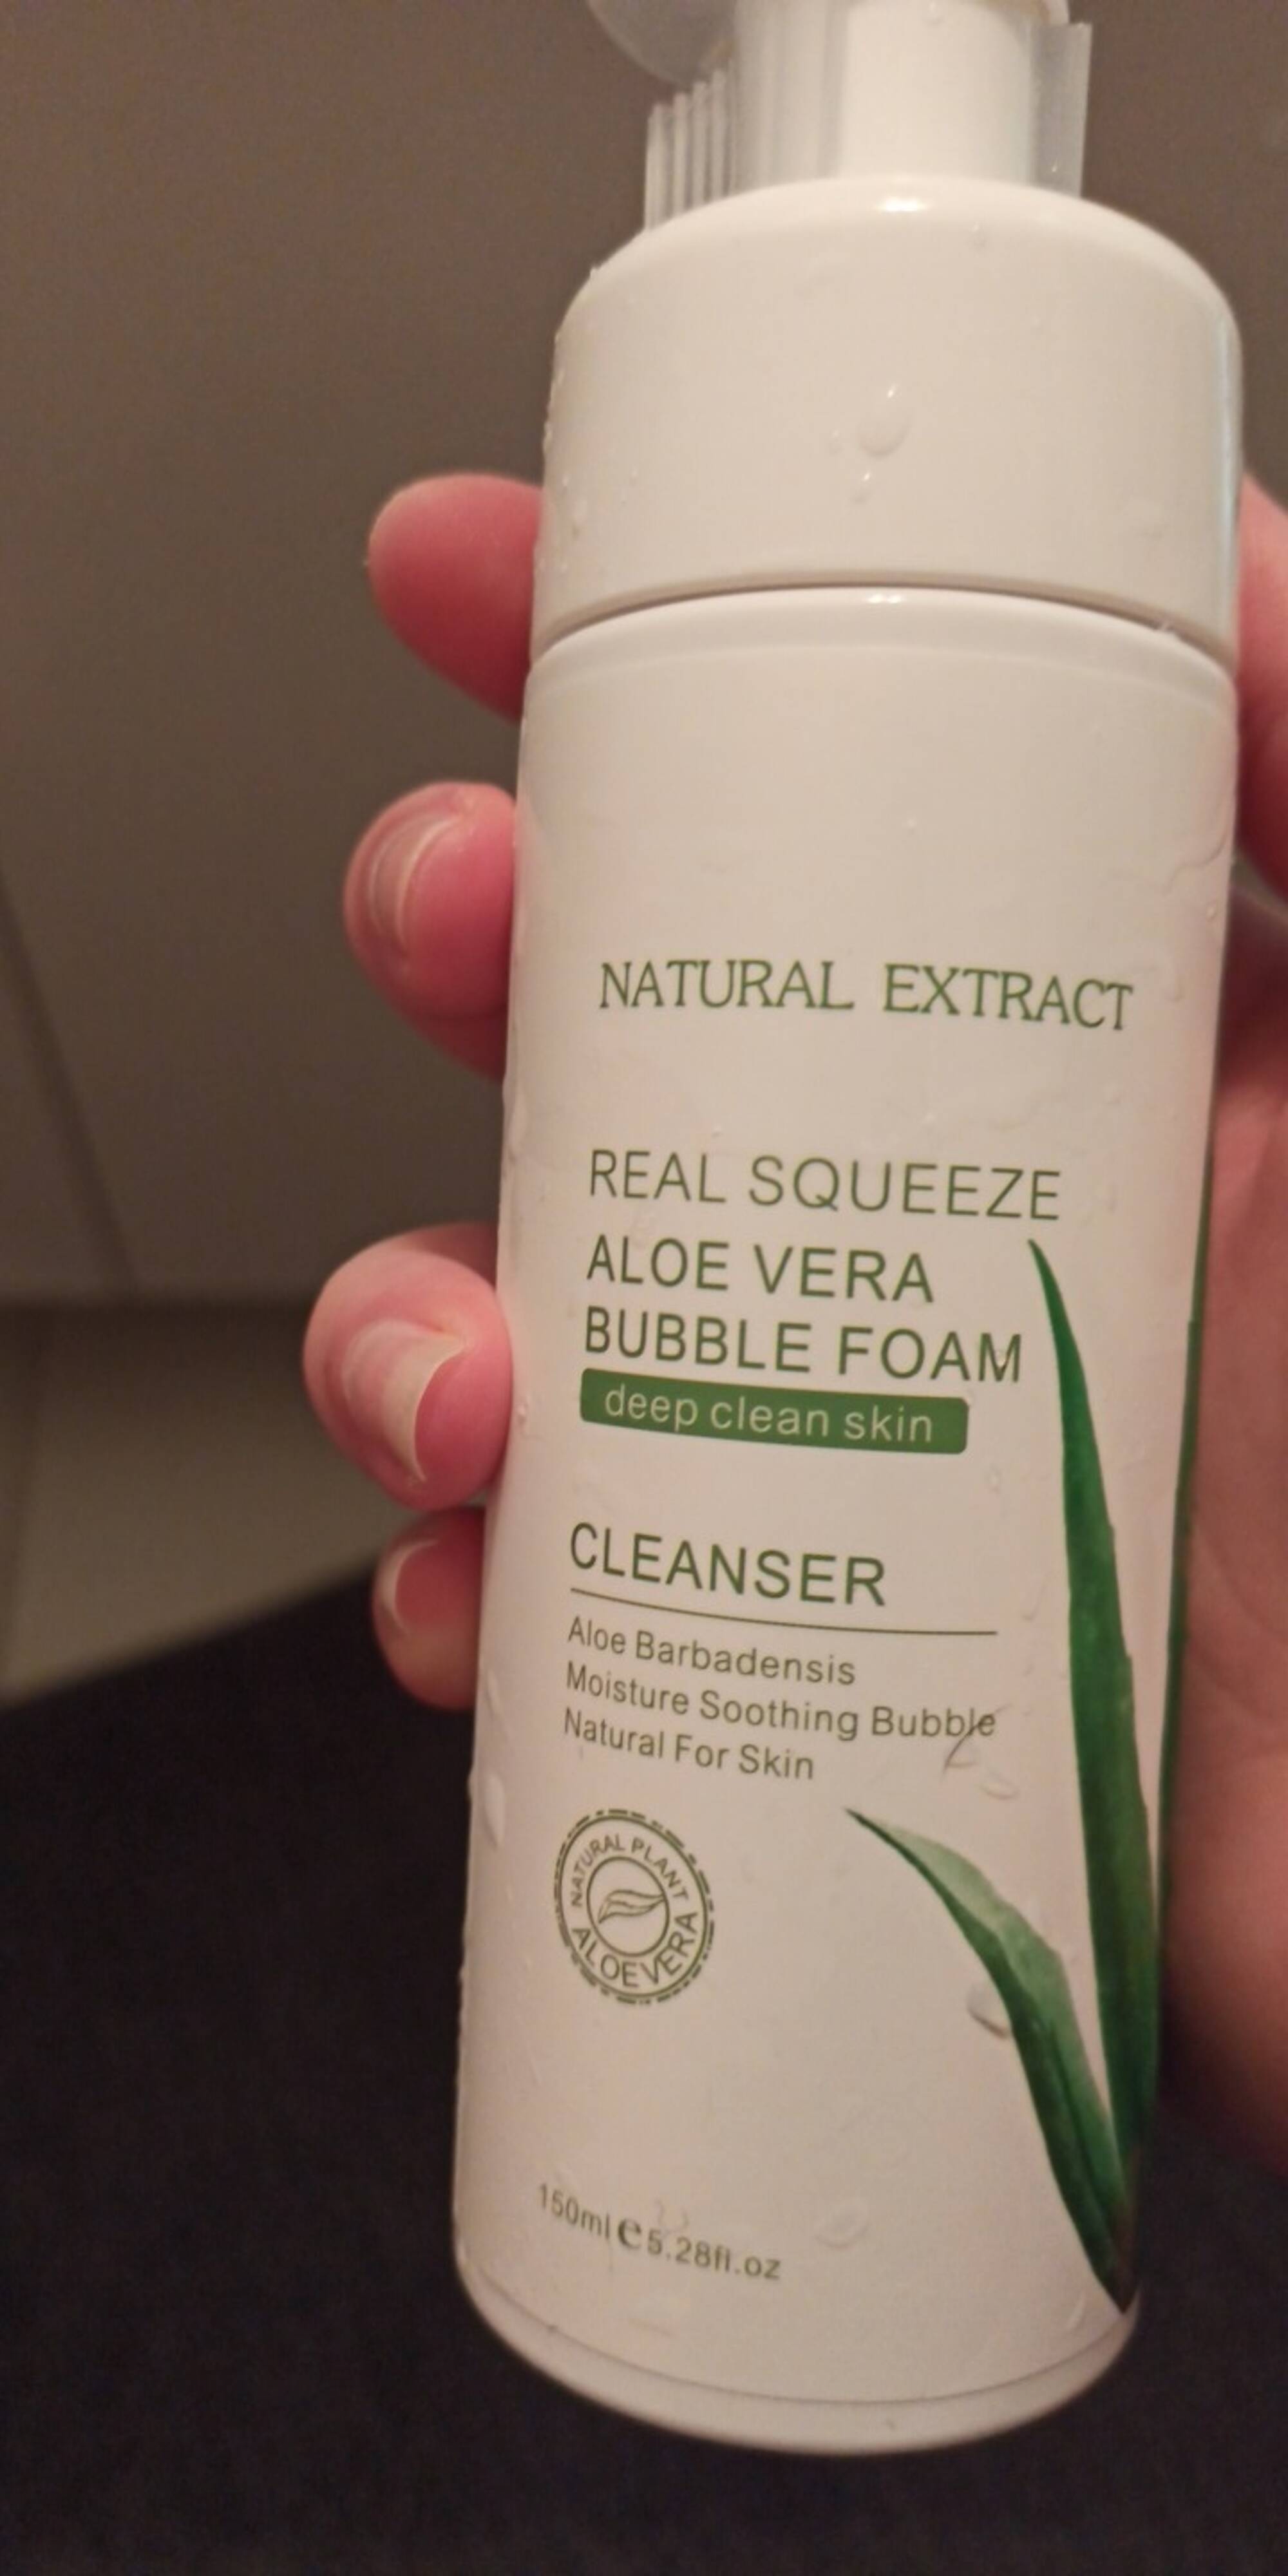 NATURAL PLANT ALOE VERA - Real squeeze - Cleanser bubble foam